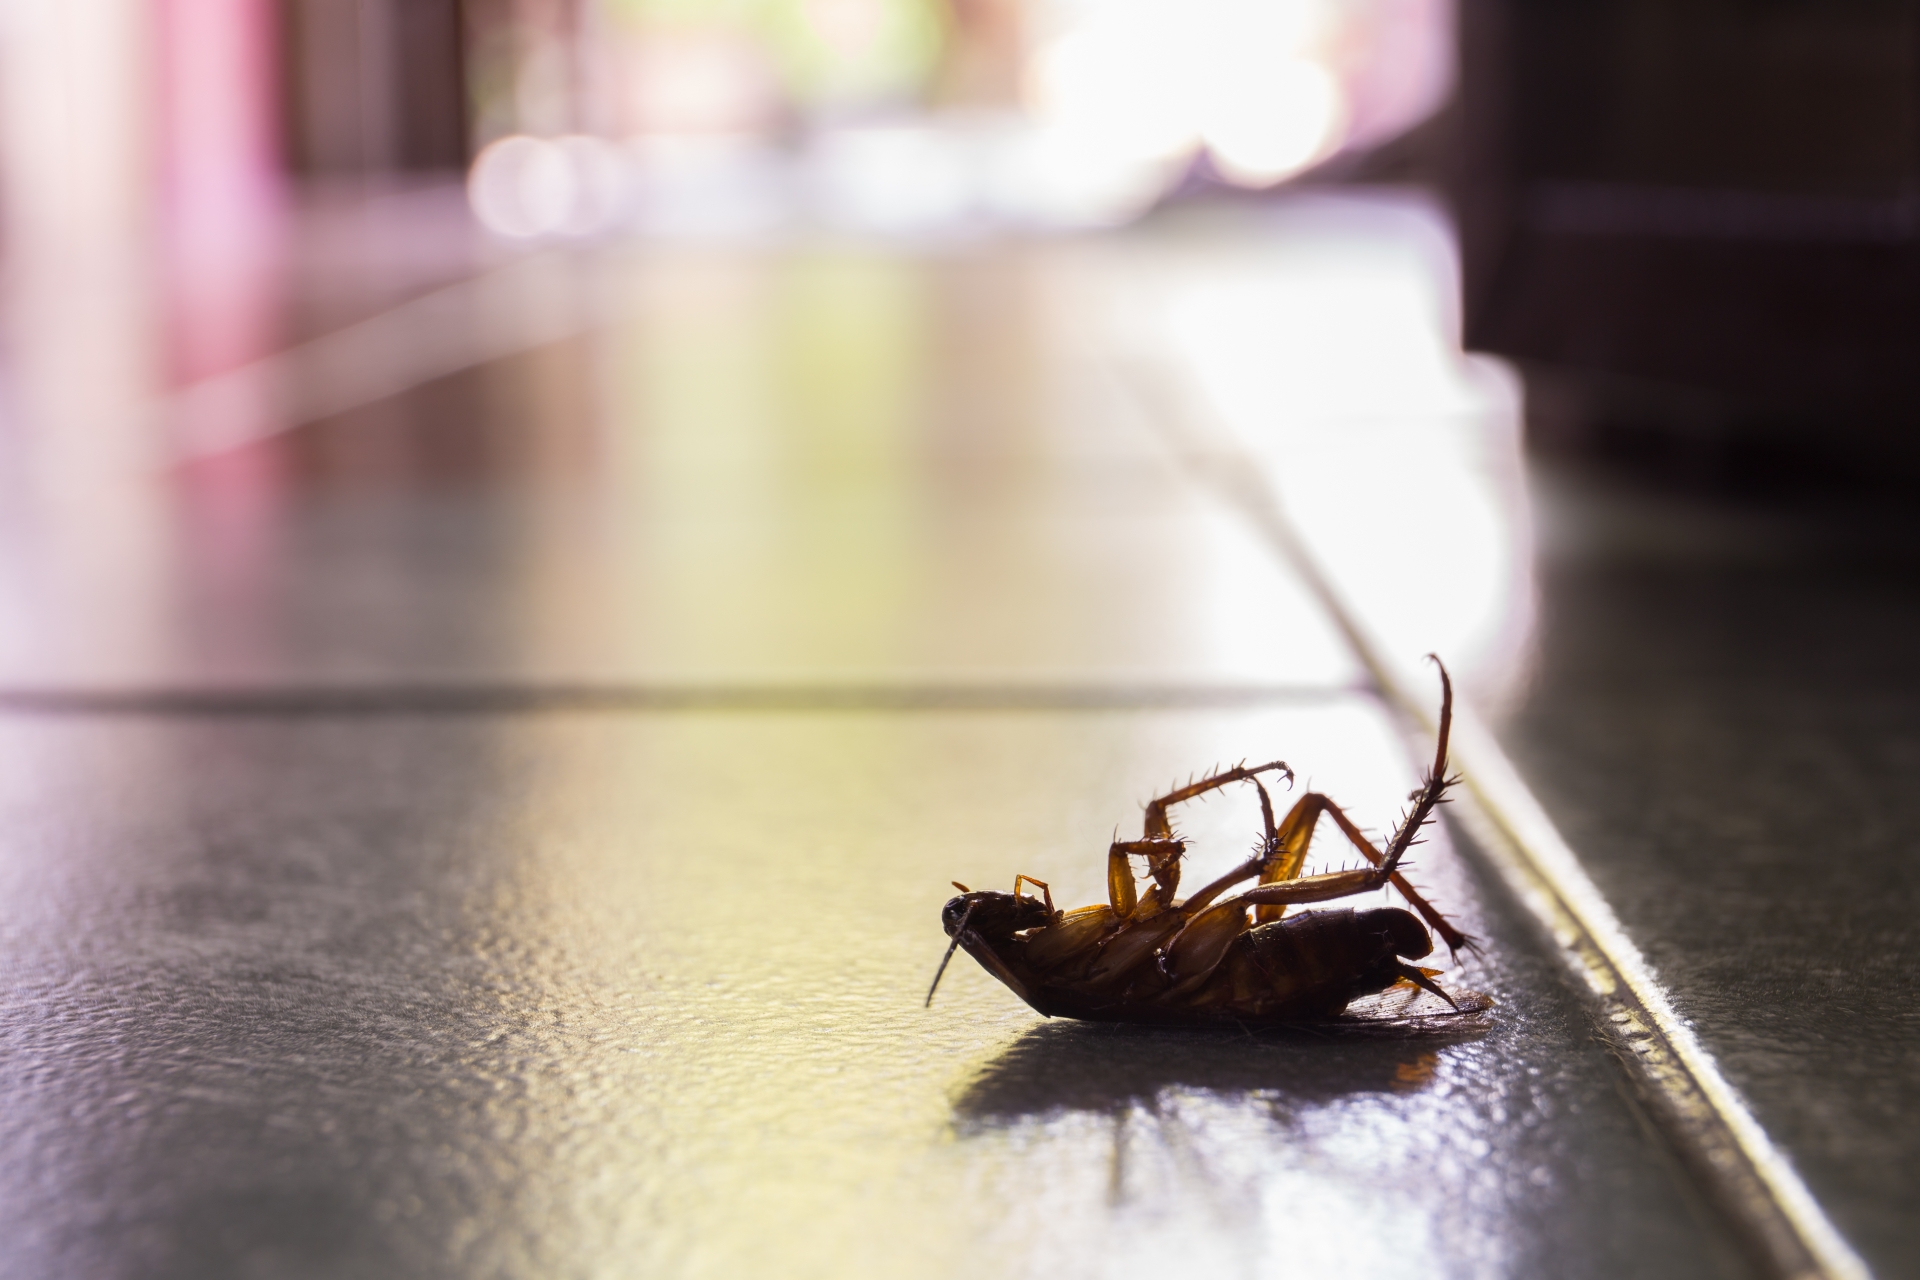 Cockroach Control, Pest Control in Sunbury-on-Thames, TW16. Call Now 020 8166 9746